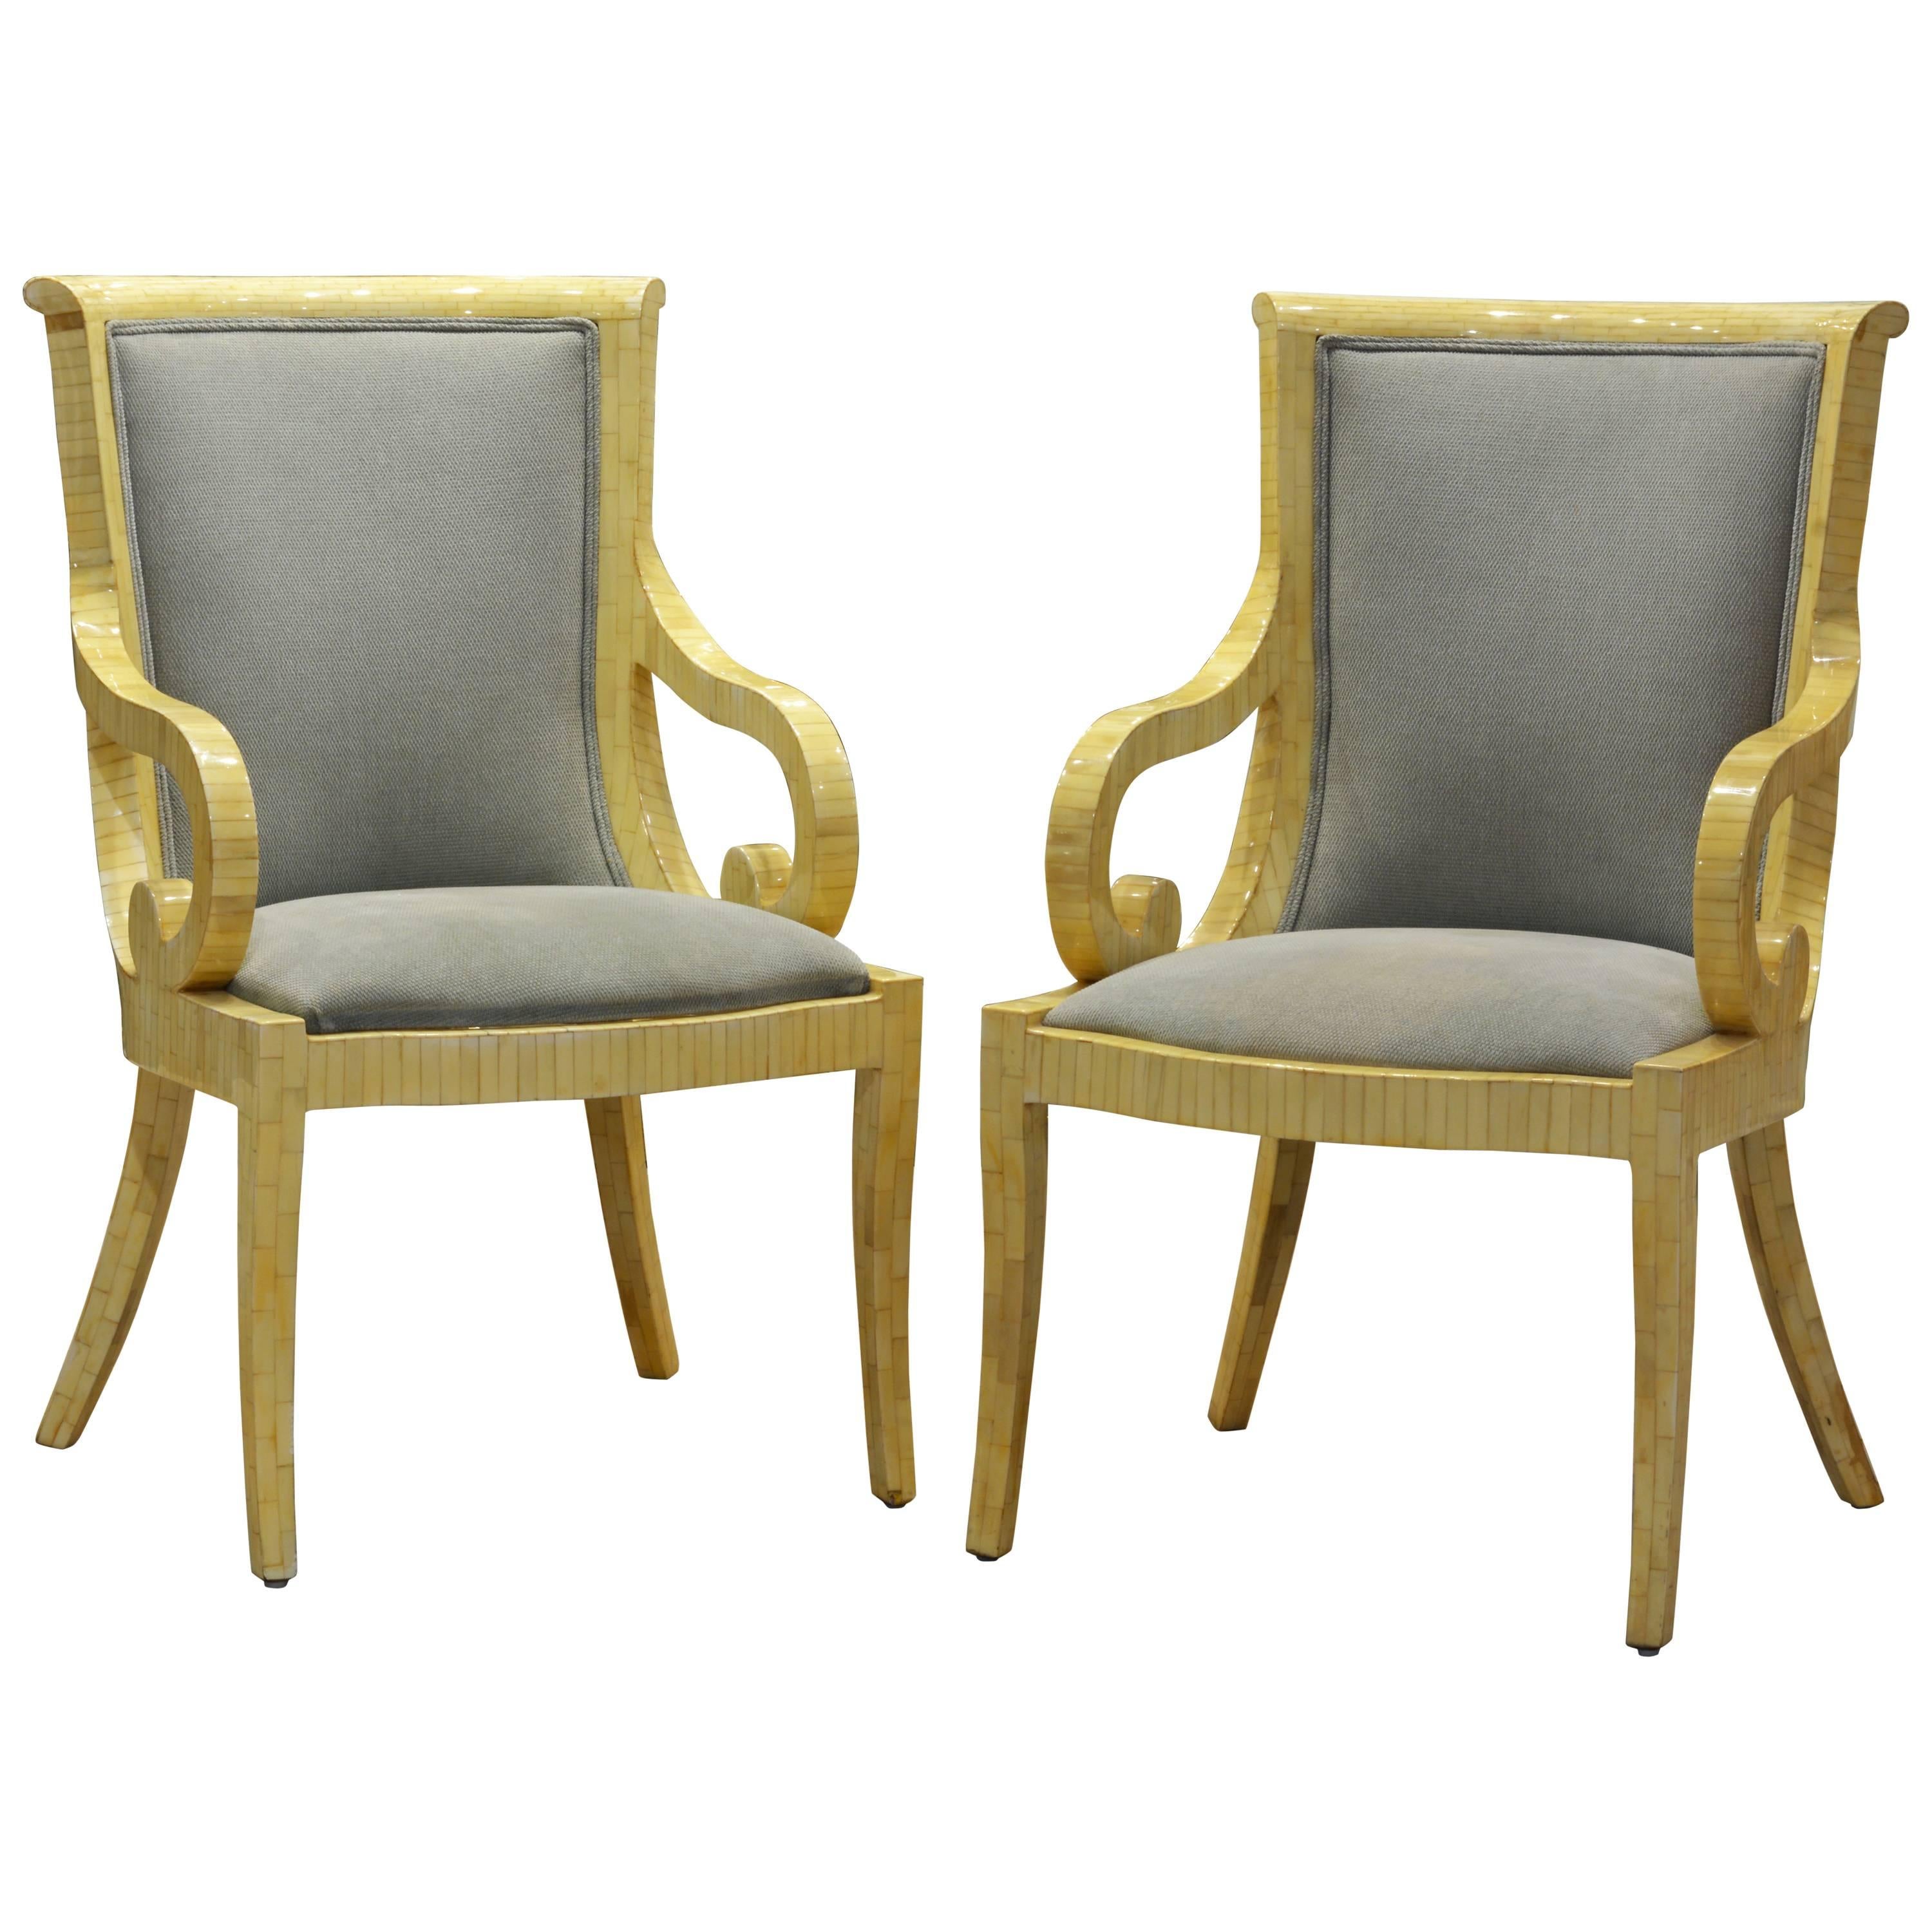 Pair of Tessellated Neoclassical Style Bone Inlay Armchairs by Enrique Garcel